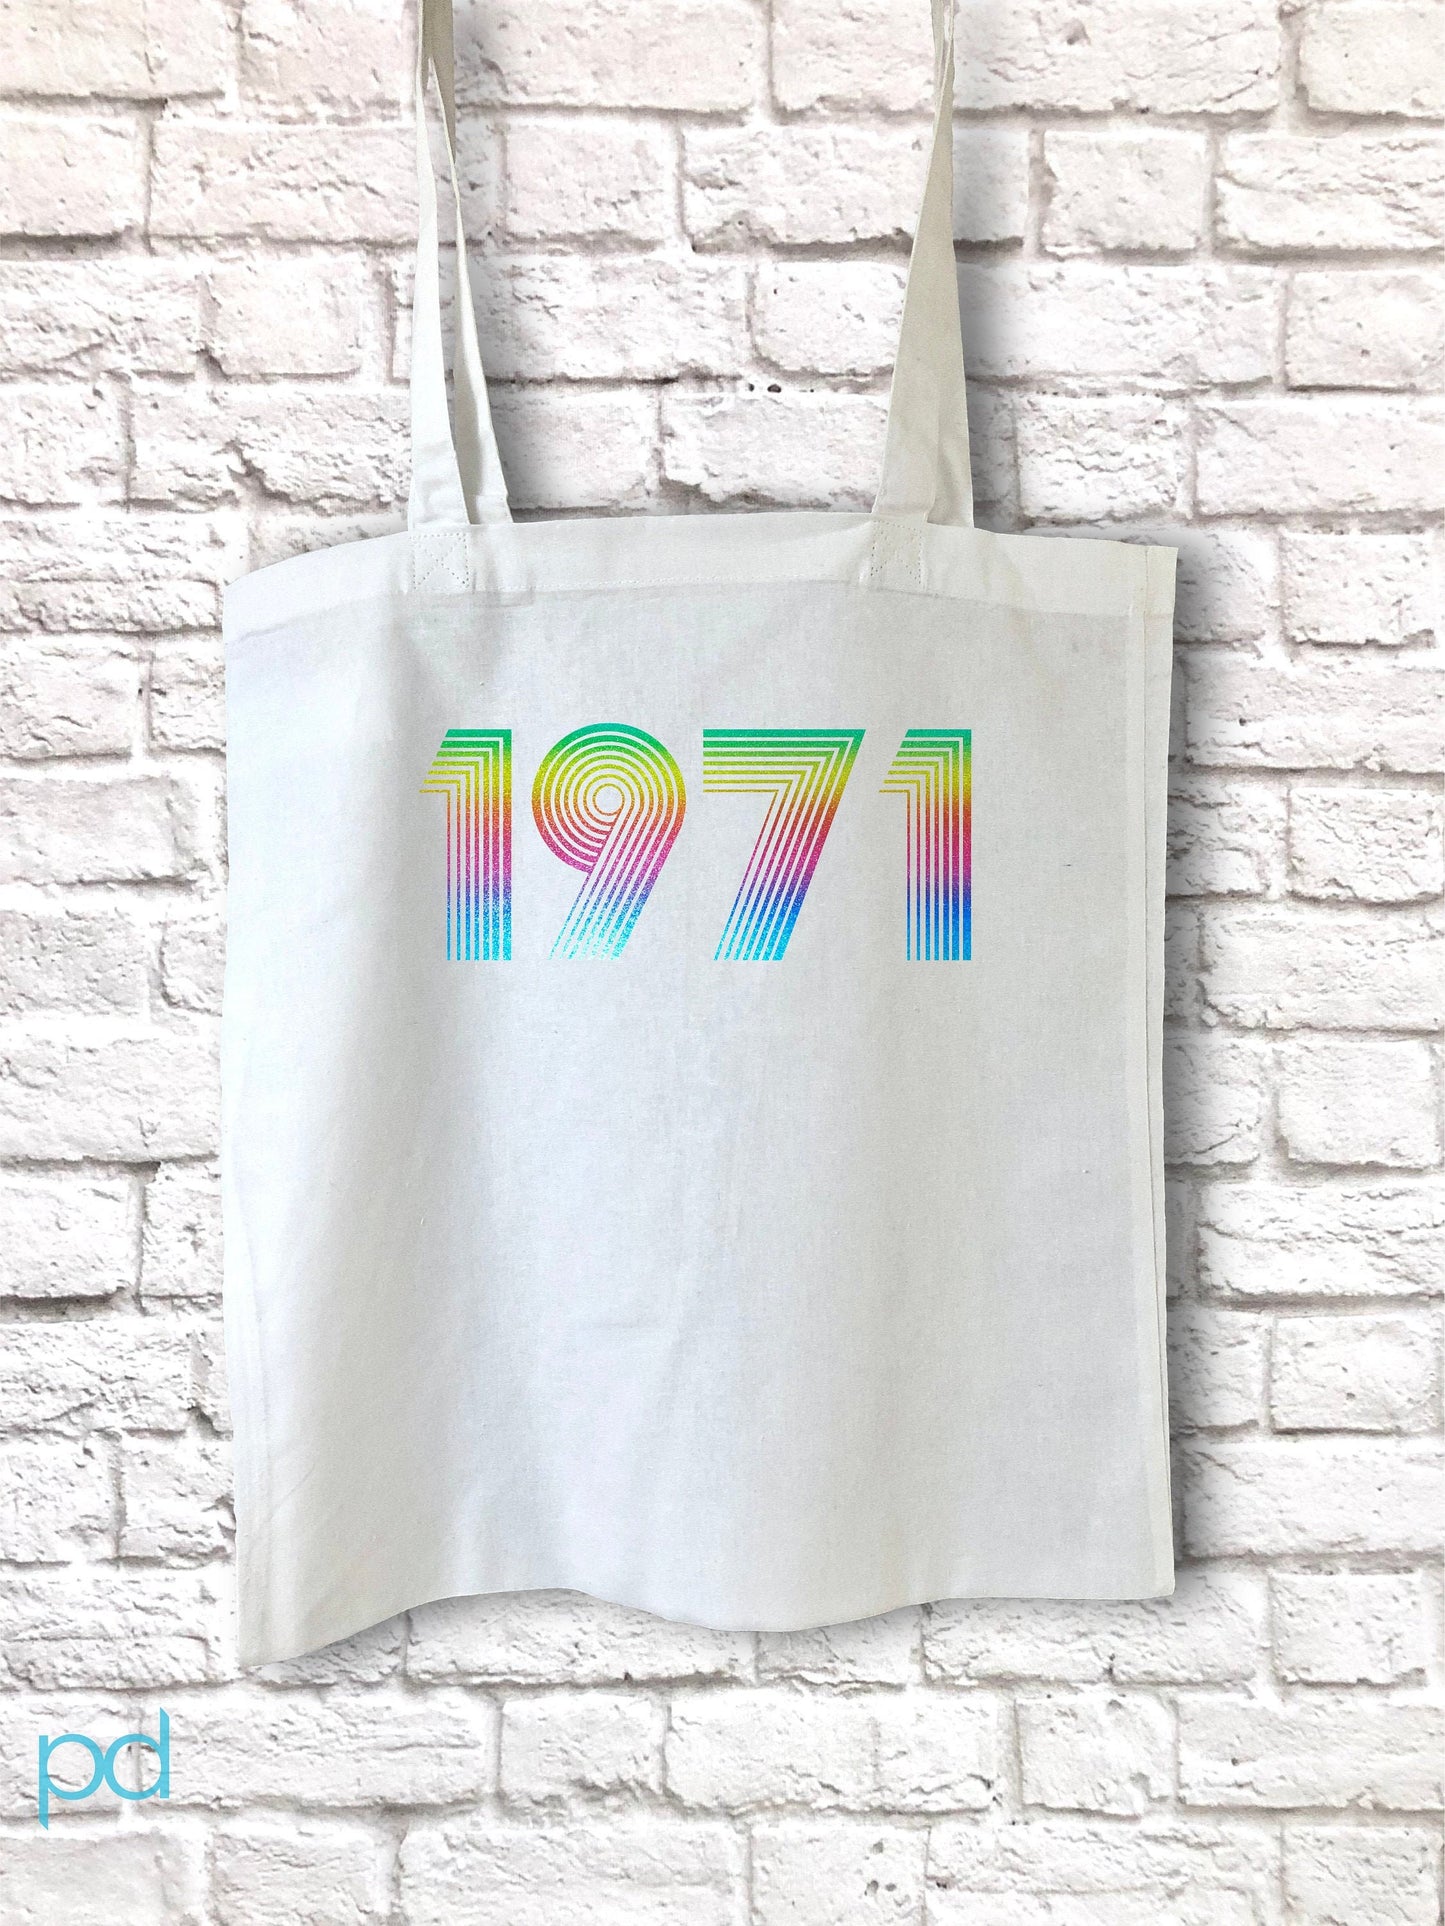 1971 Tote Bag Funky Effect Vinyl HTV, 51st Birthday Gift Shopping Carrier in Retro & Vintage 70s style, Fiftieth Unisex Tote Bag